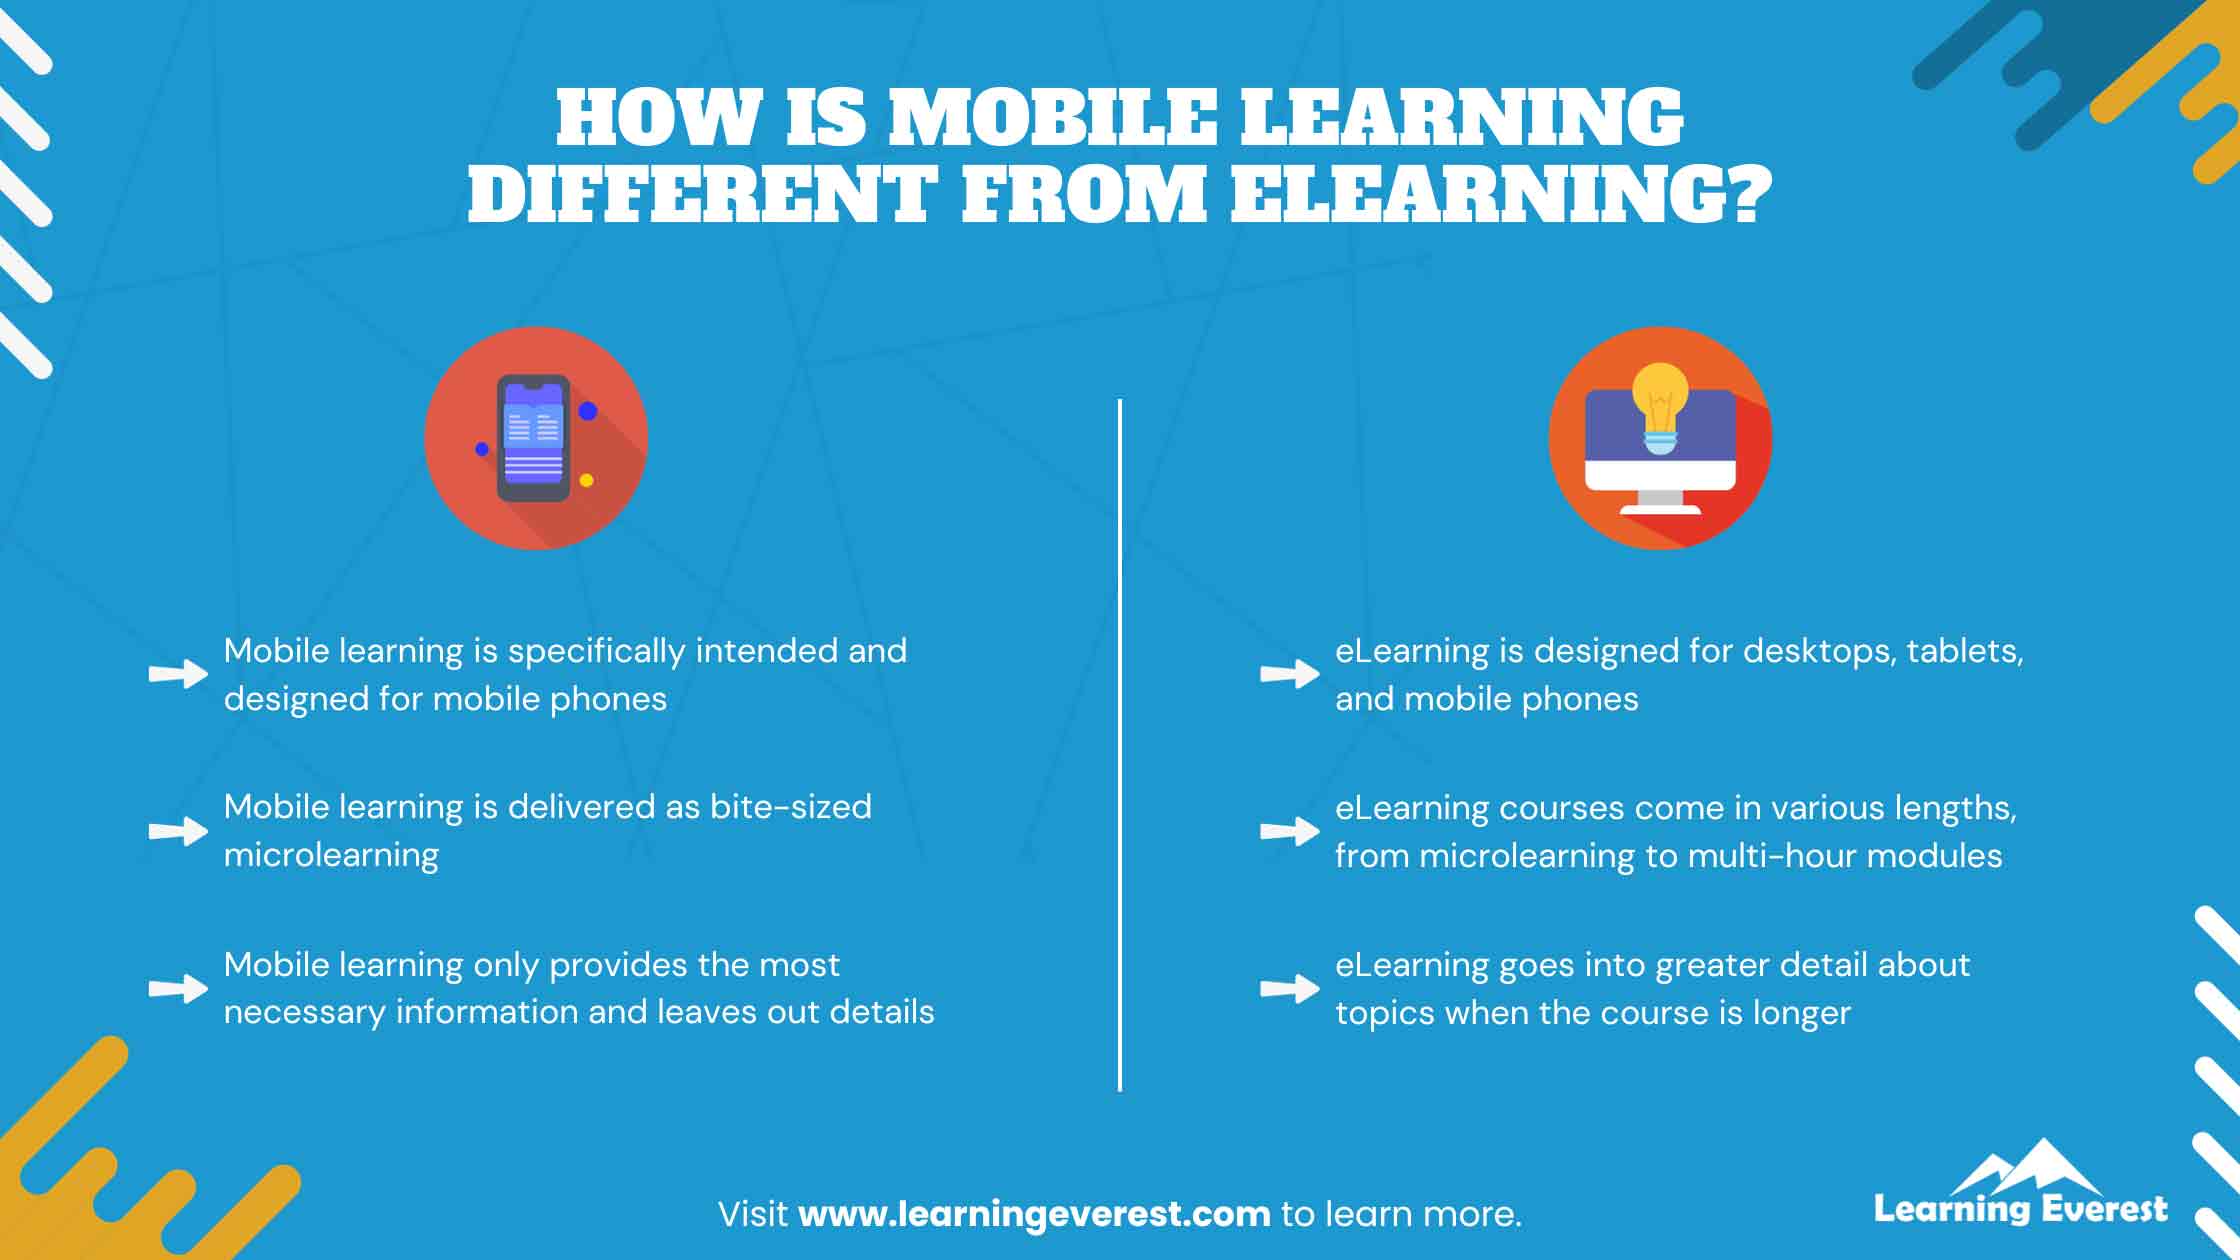 How is Mobile Learning Different from eLearning